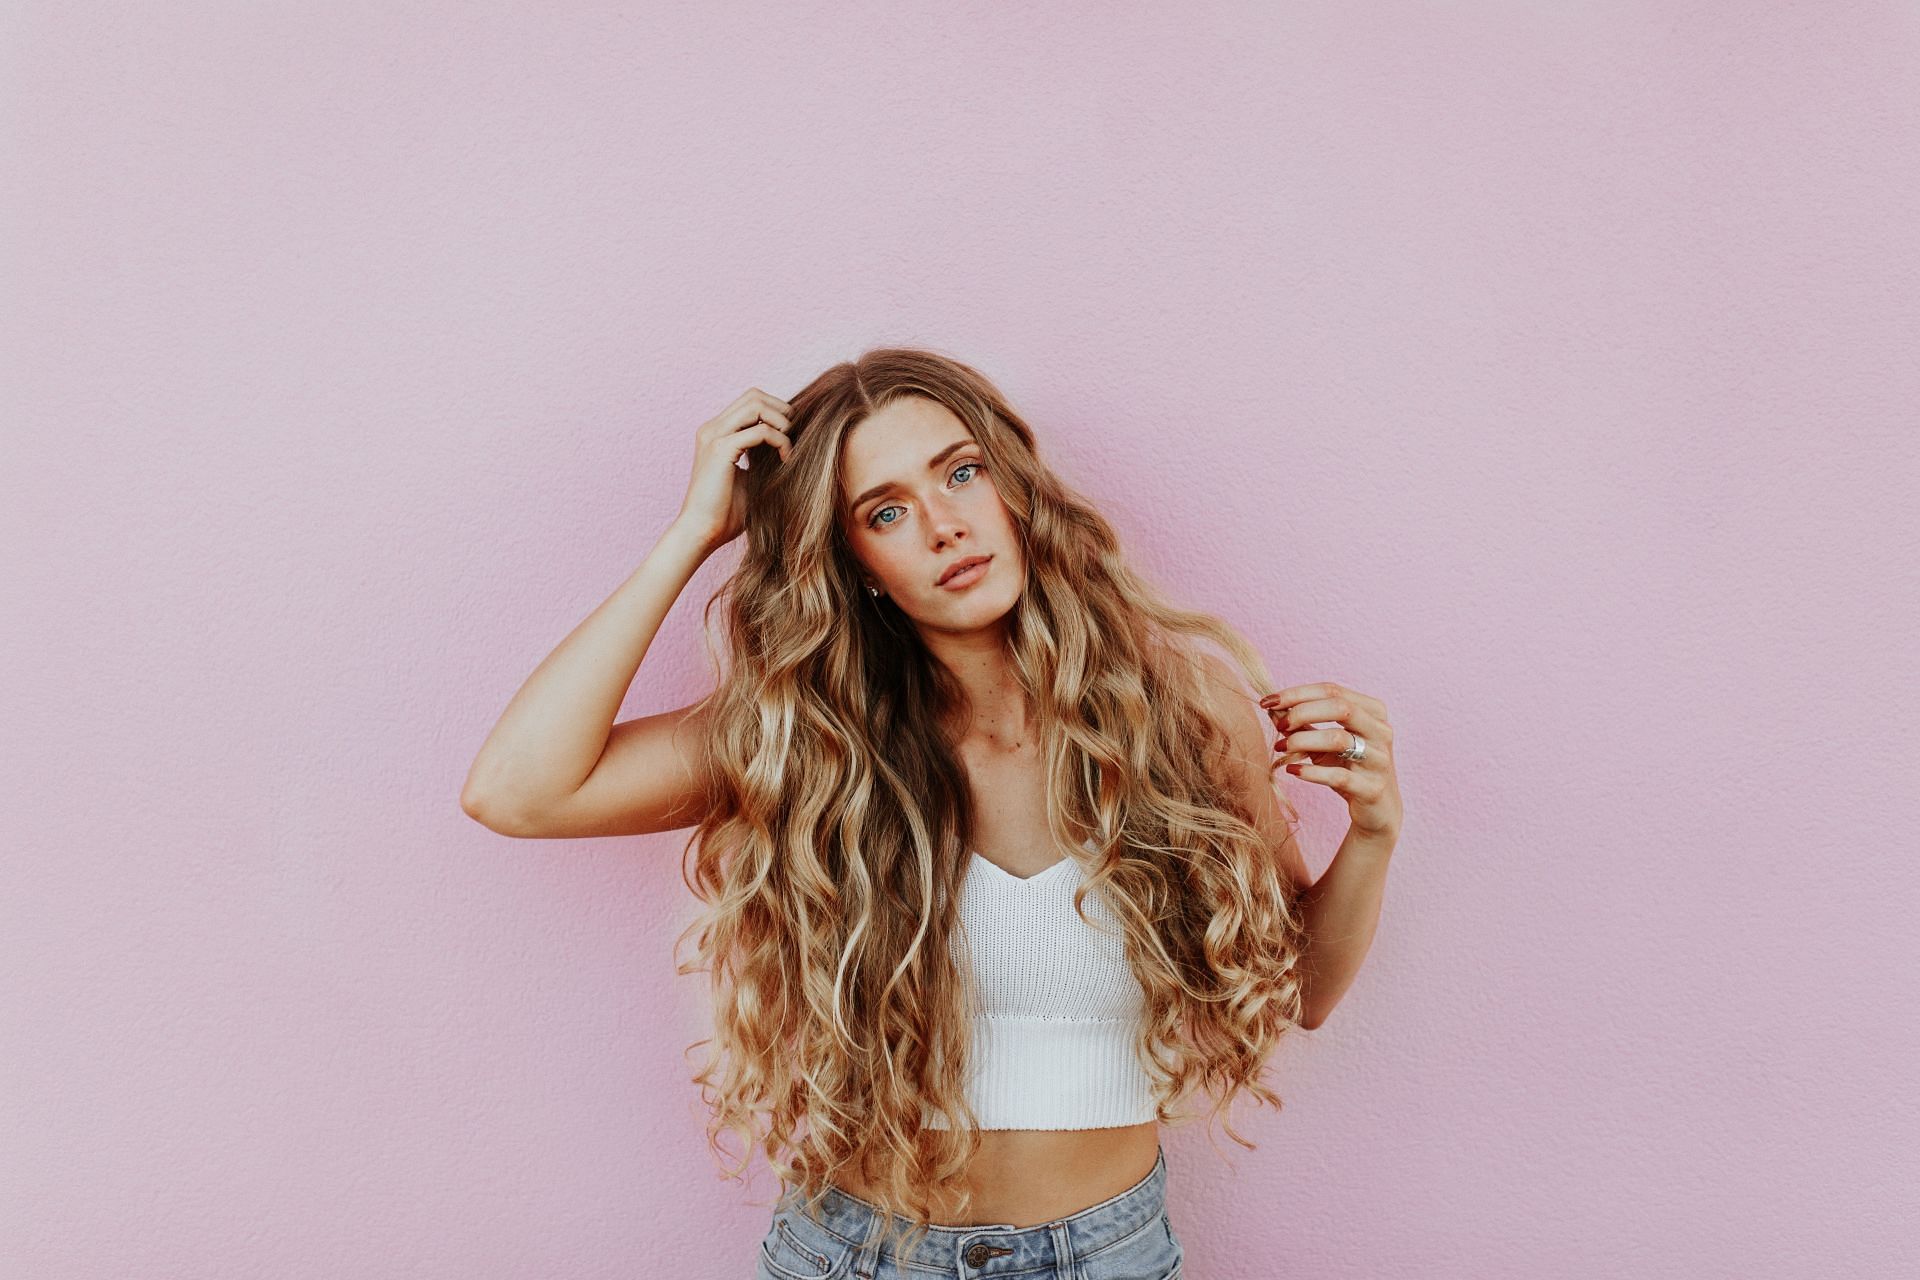 Proper brushing of hair is extremely important for hair care. (Image via Unsplash/ Averie Woodard)